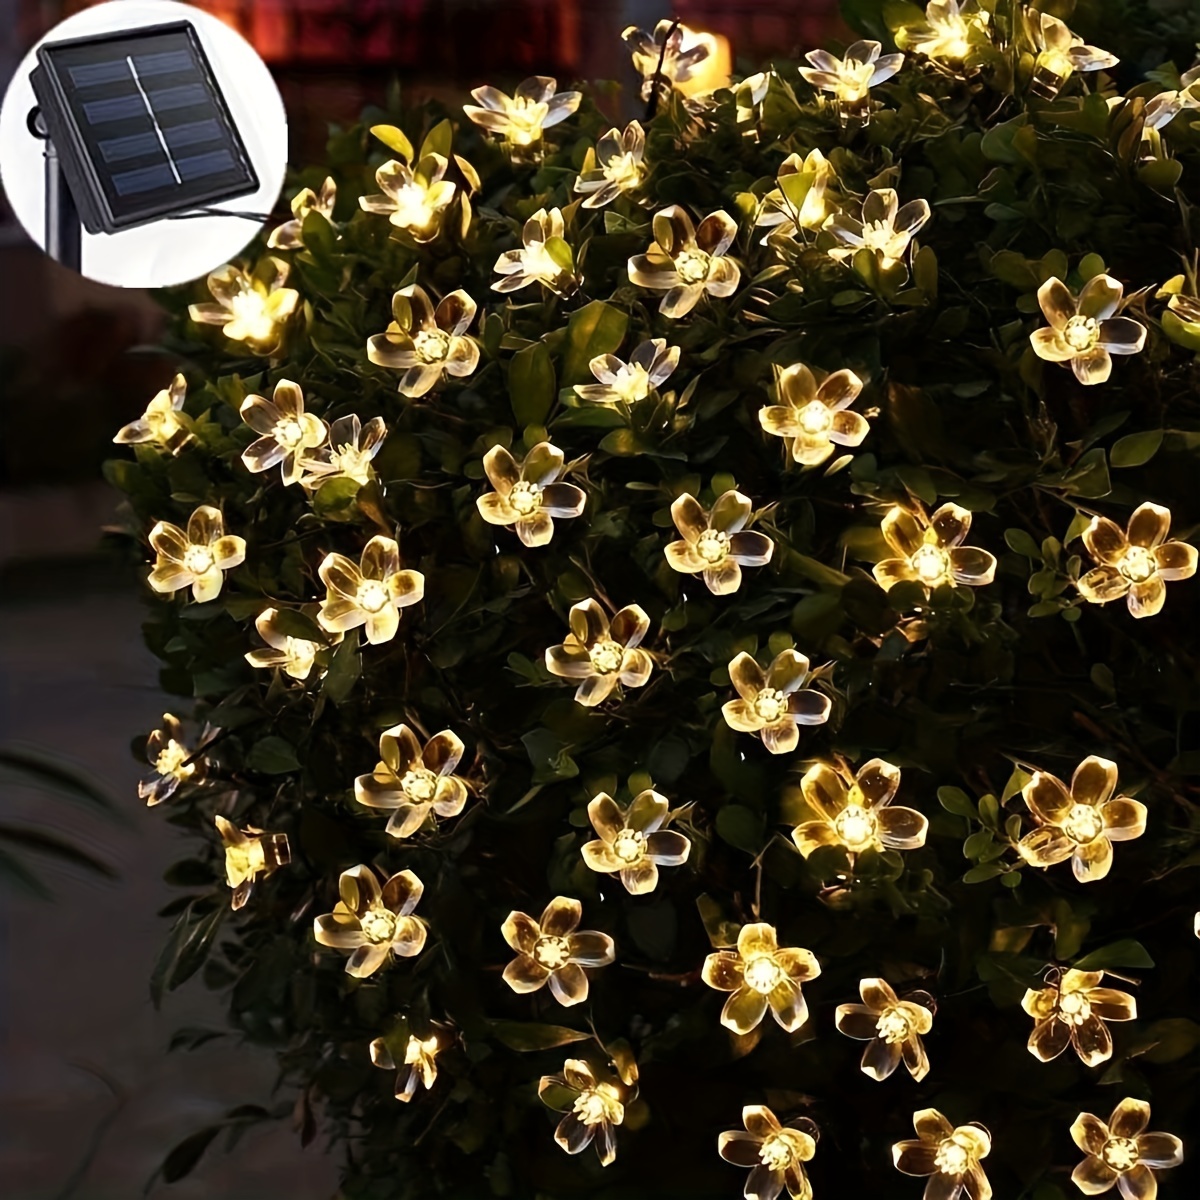 1pc solar string flower light outdoor waterproof 6 5m 21ft 30 led fairy light for garden fence patio yard party dec oration included 2m wire christmas halloween decorations details 0